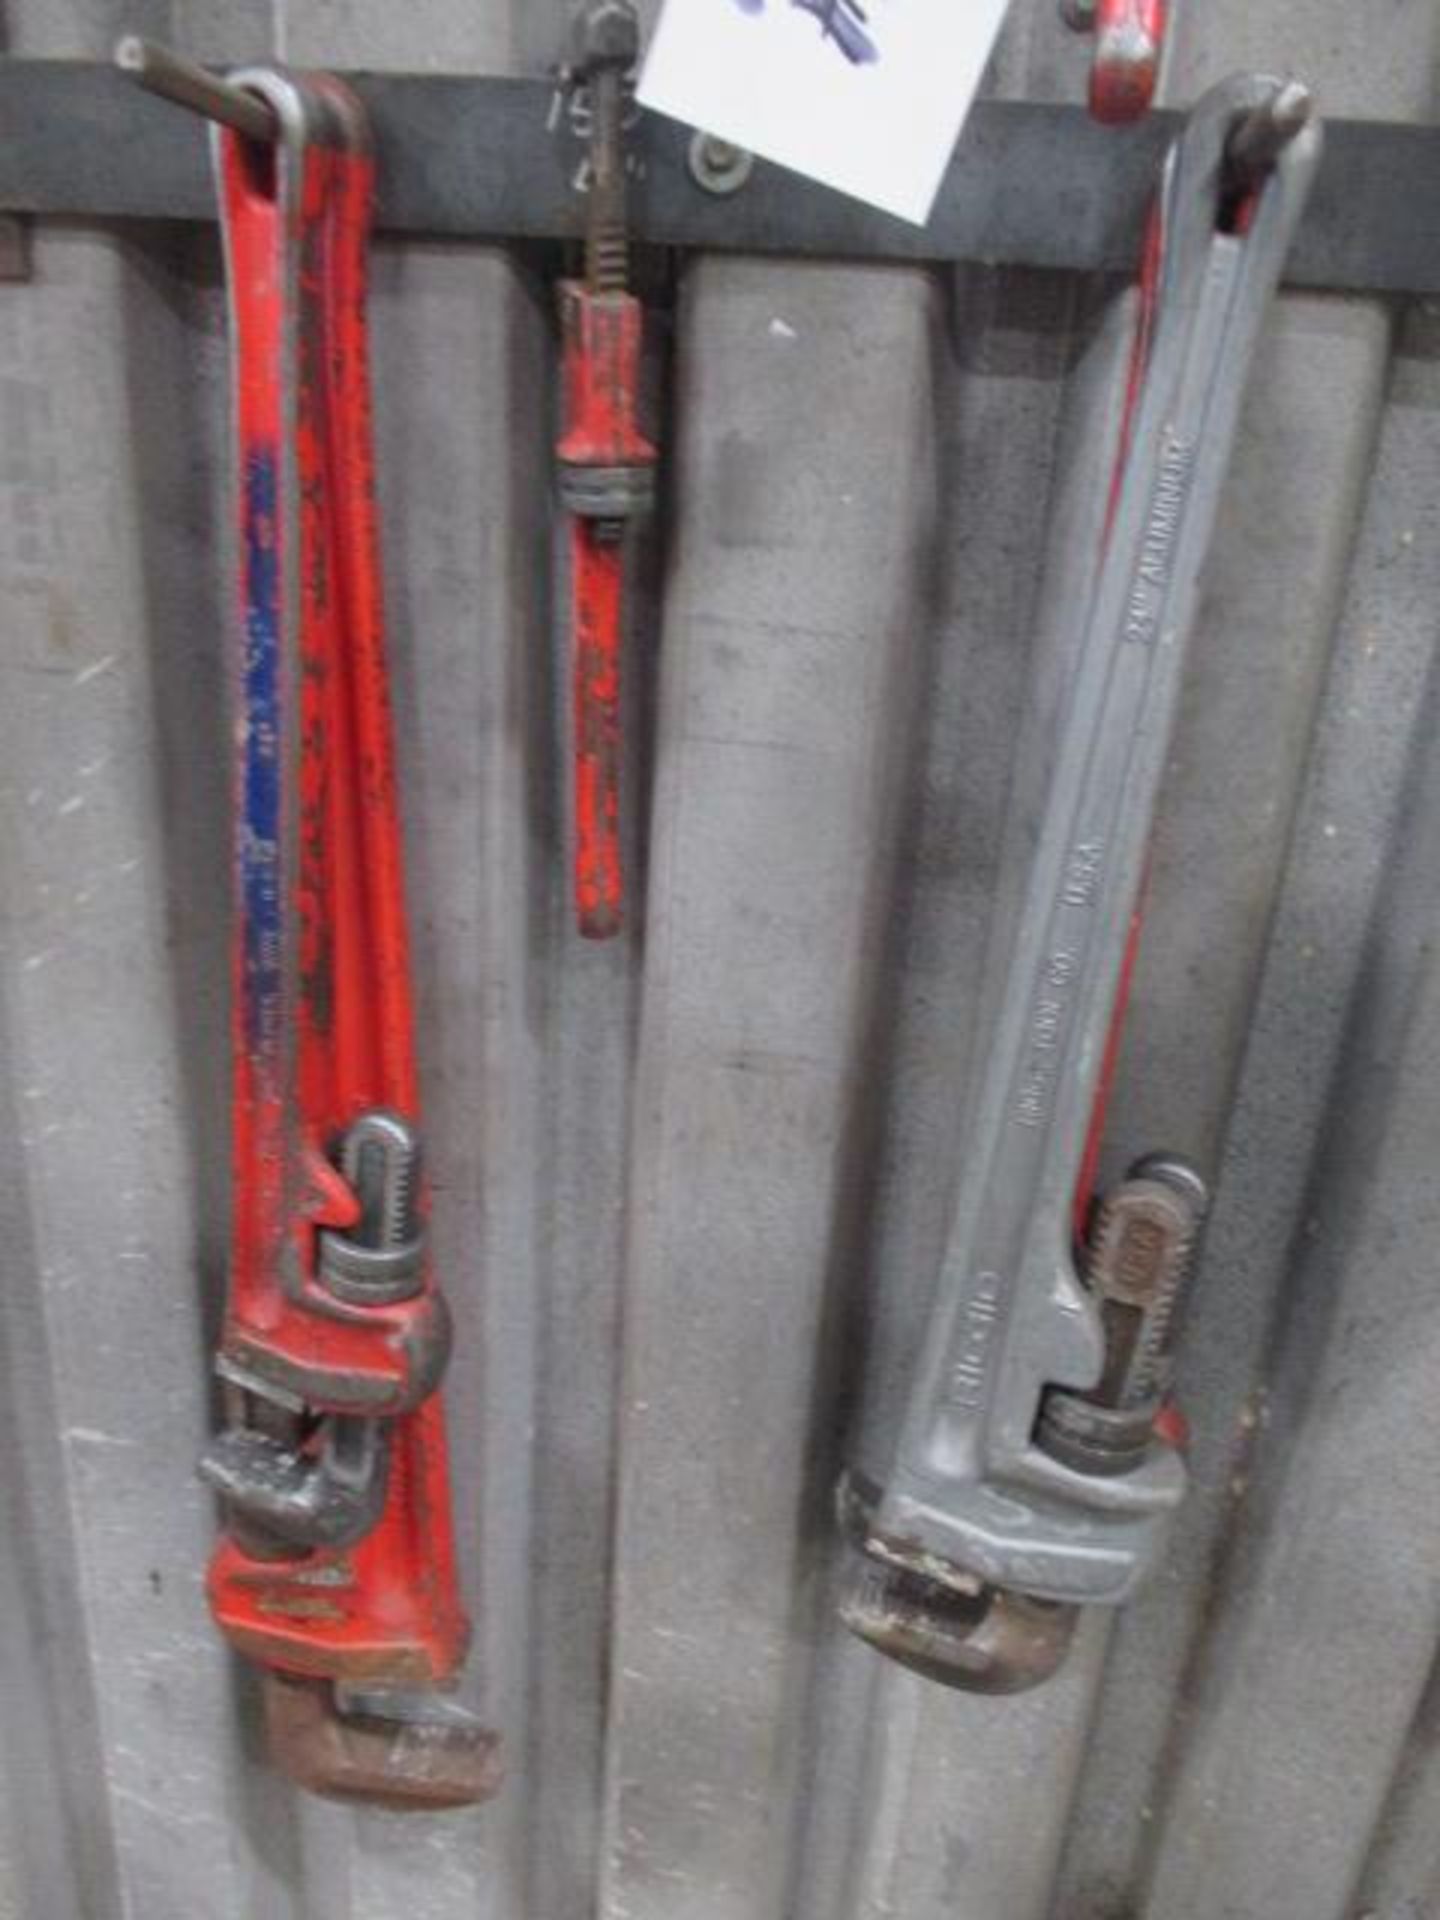 Approx 10 Ridgid Pipe Wrenches - 3 Alum and Steel Pipe Wrenches - Image 2 of 2